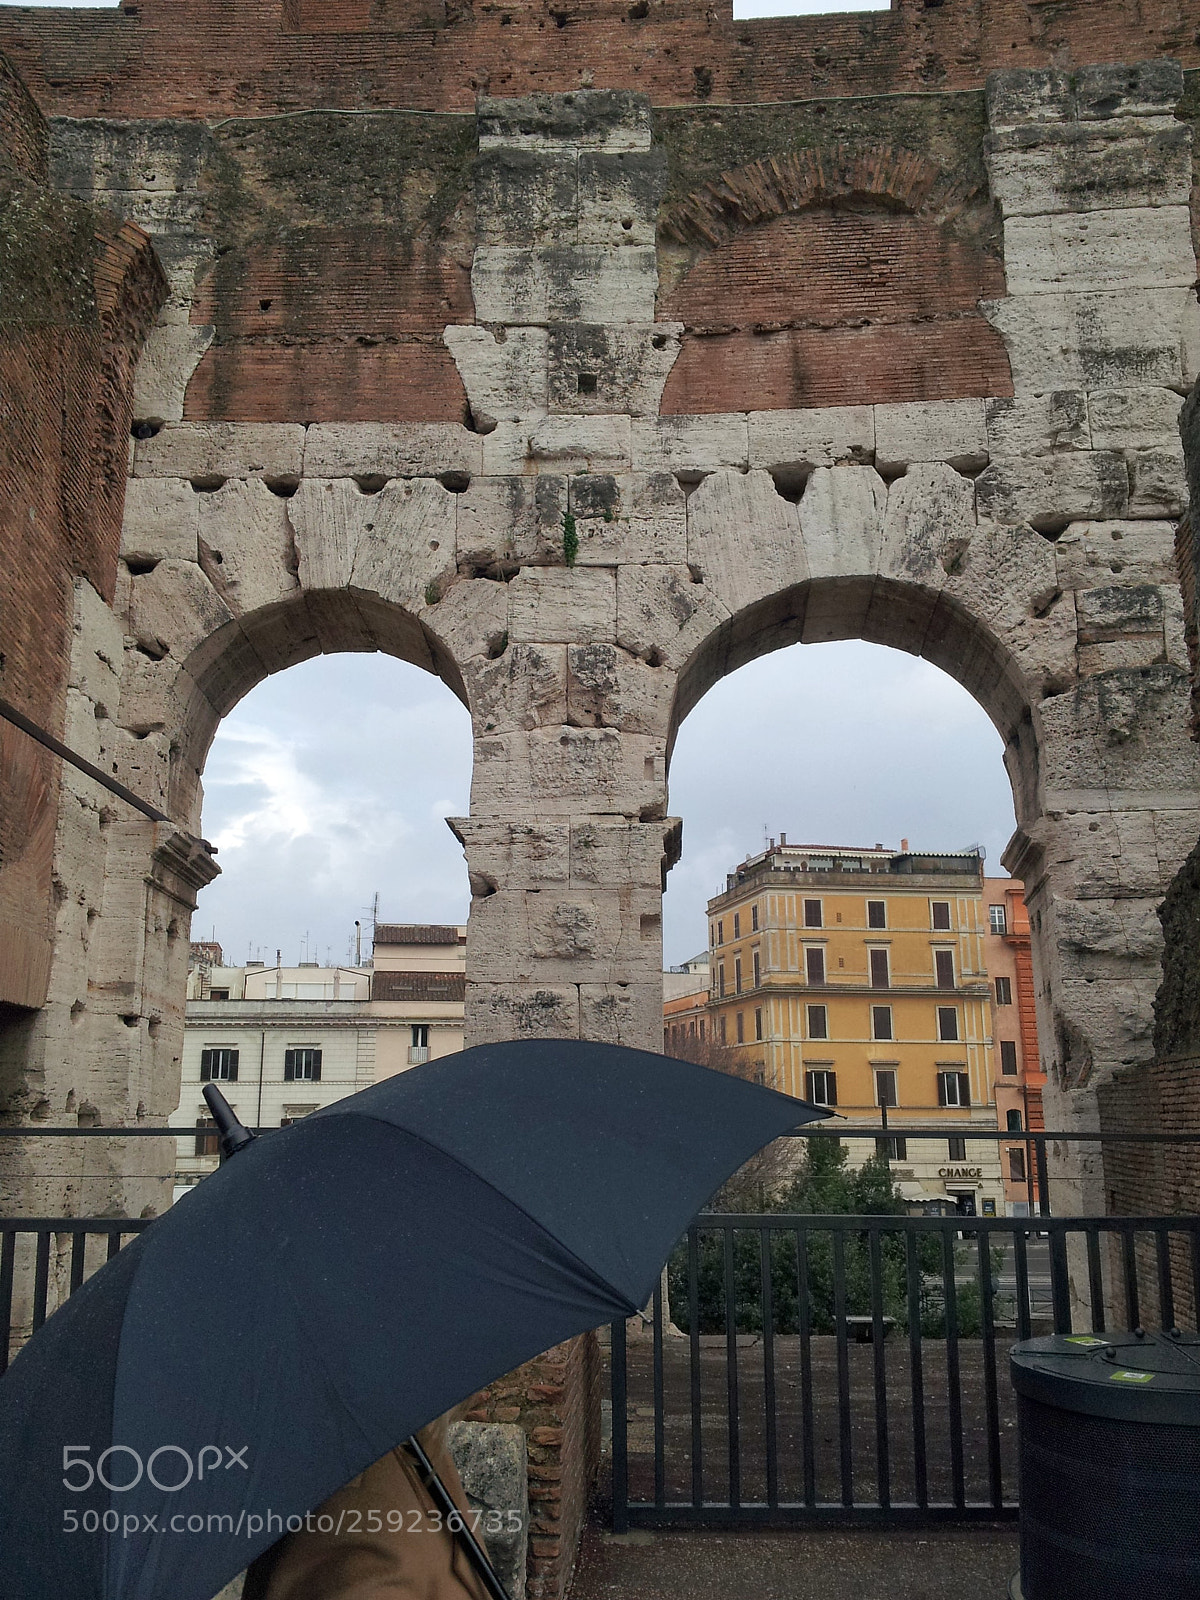 Samsung Galaxy S2 sample photo. Colosseo in a rainy photography